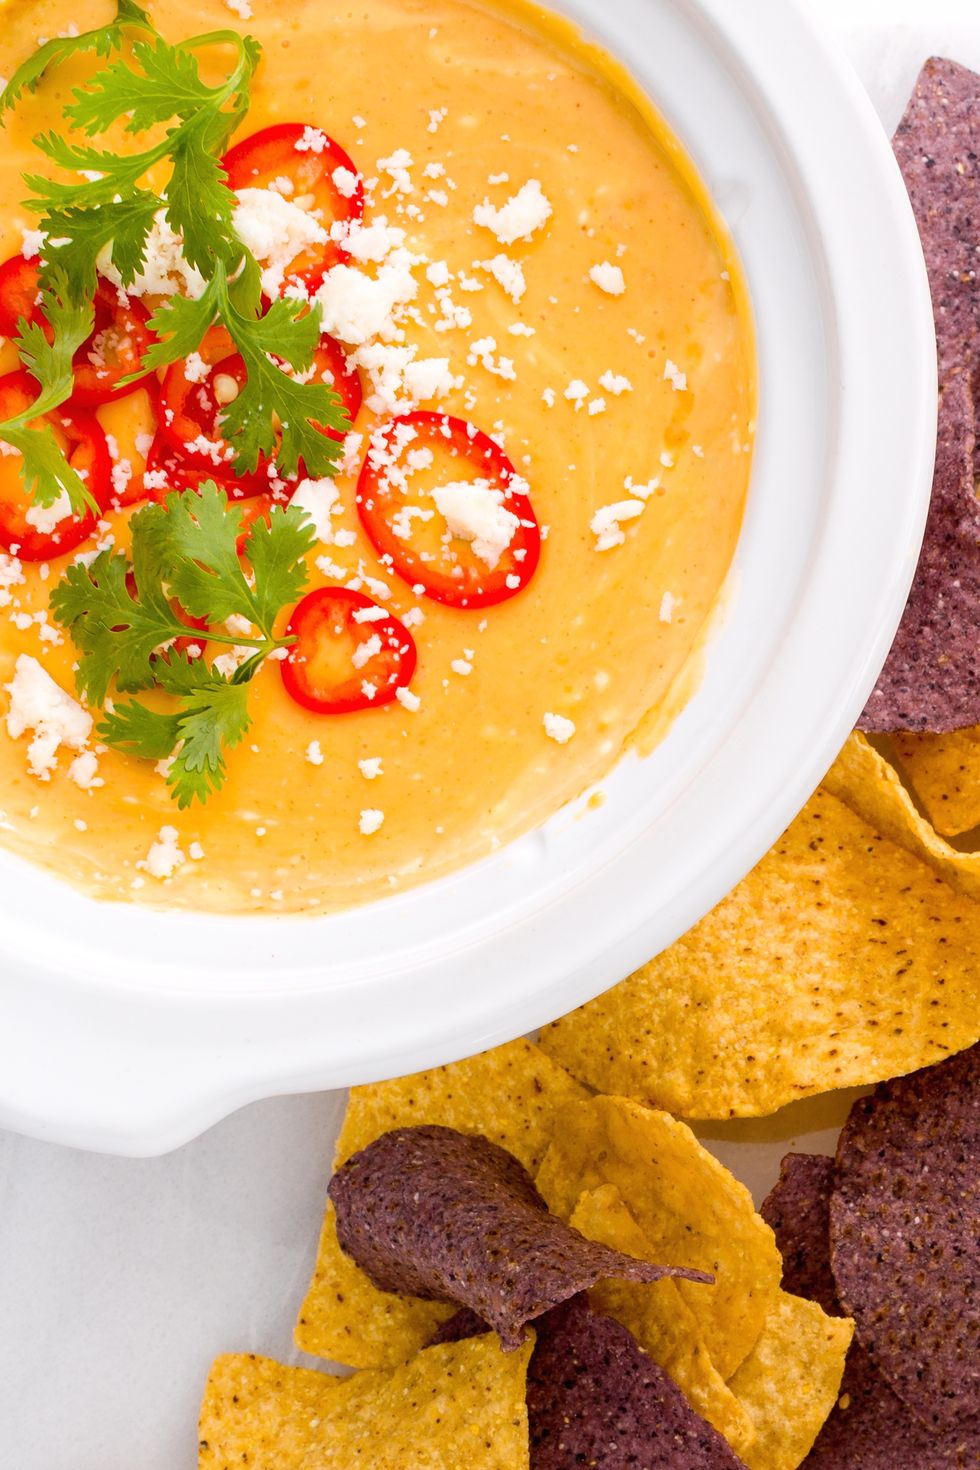 https://hips.hearstapps.com/del.h-cdn.co/assets/15/45/1446765157-delish-slowcooker-dips-queso.jpg?crop=0.9578666666666666xw:1xh;center,top&resize=980:*